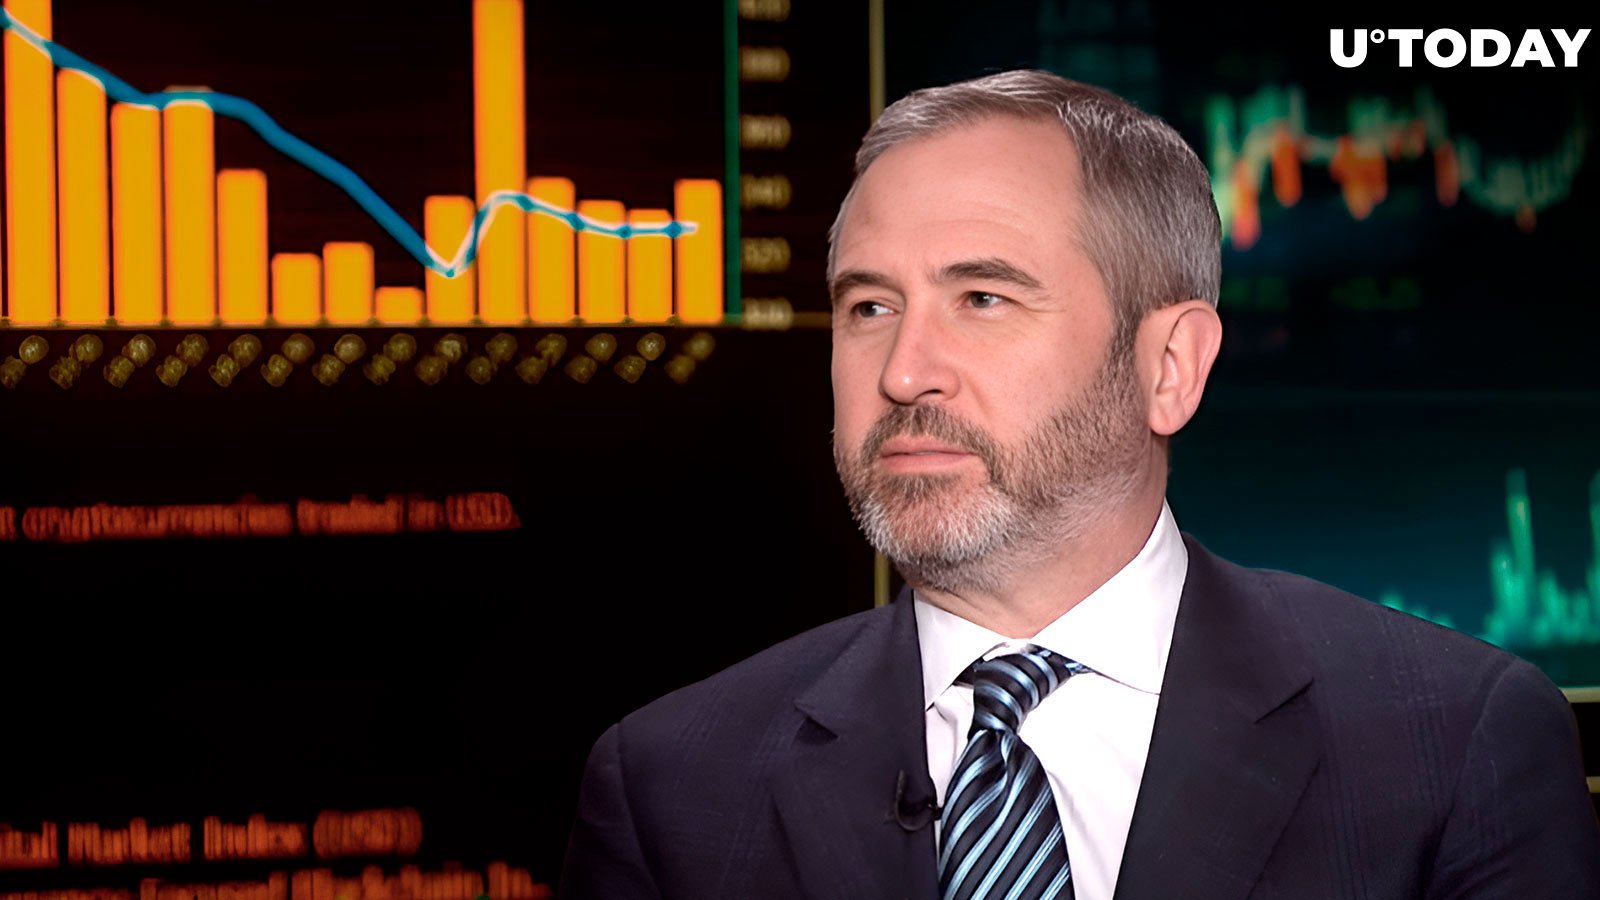 Ripple CEO: Legal Battle with SEC Will Be Over “Very Soon”